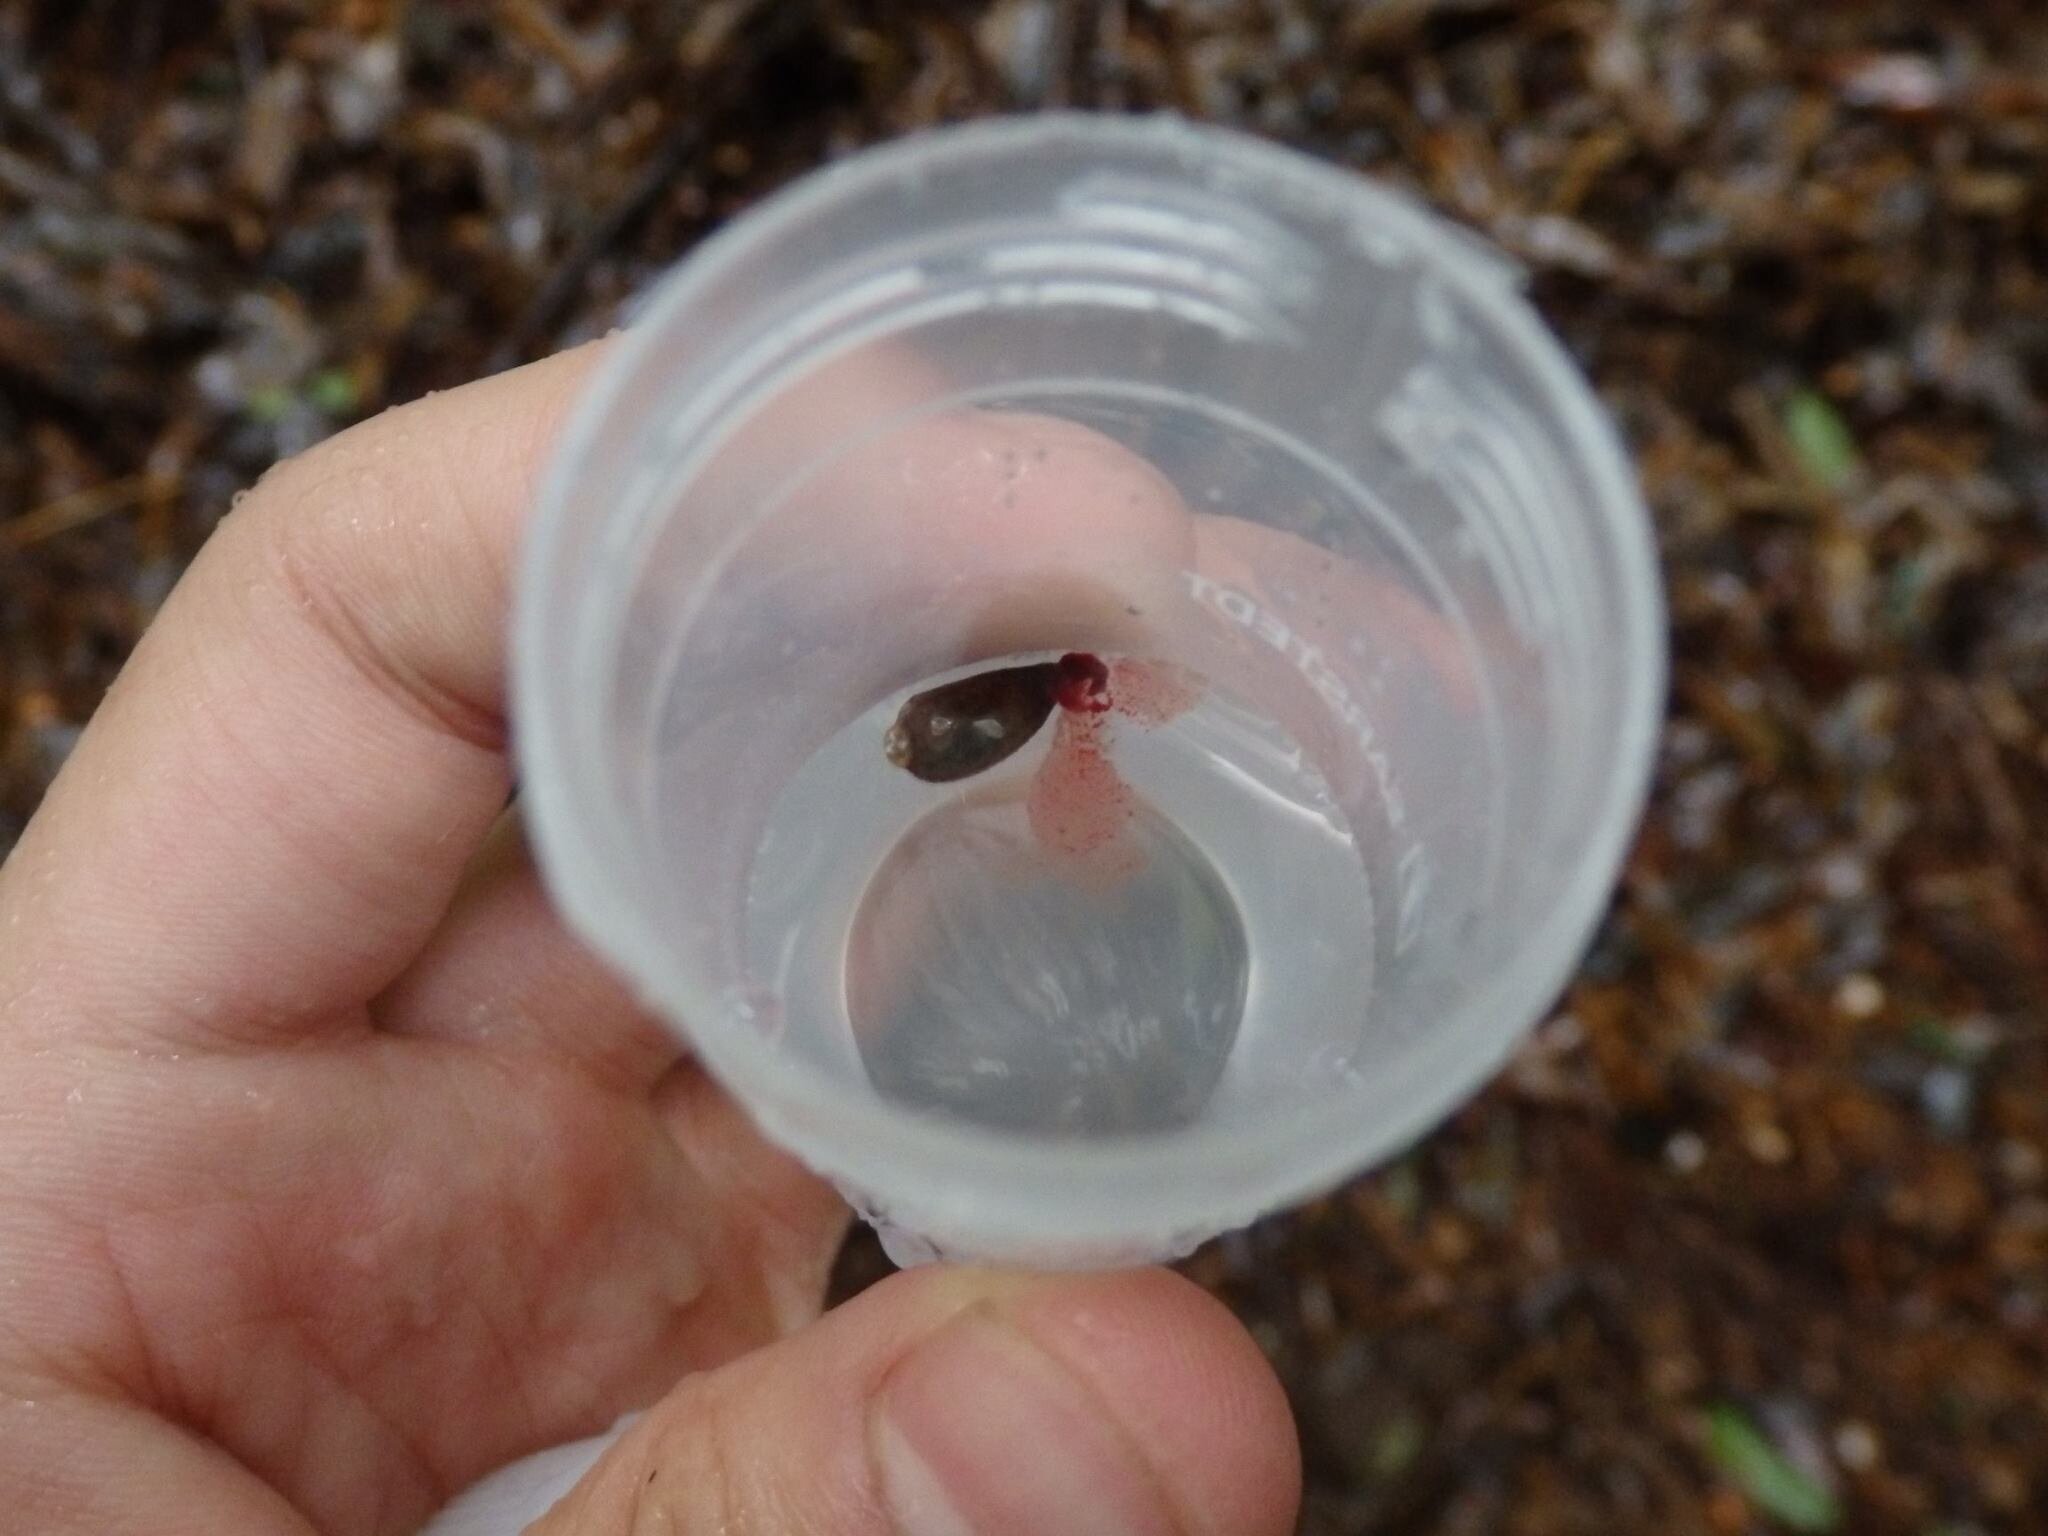 Blood-sucking leeches can help scientists map biodiversity